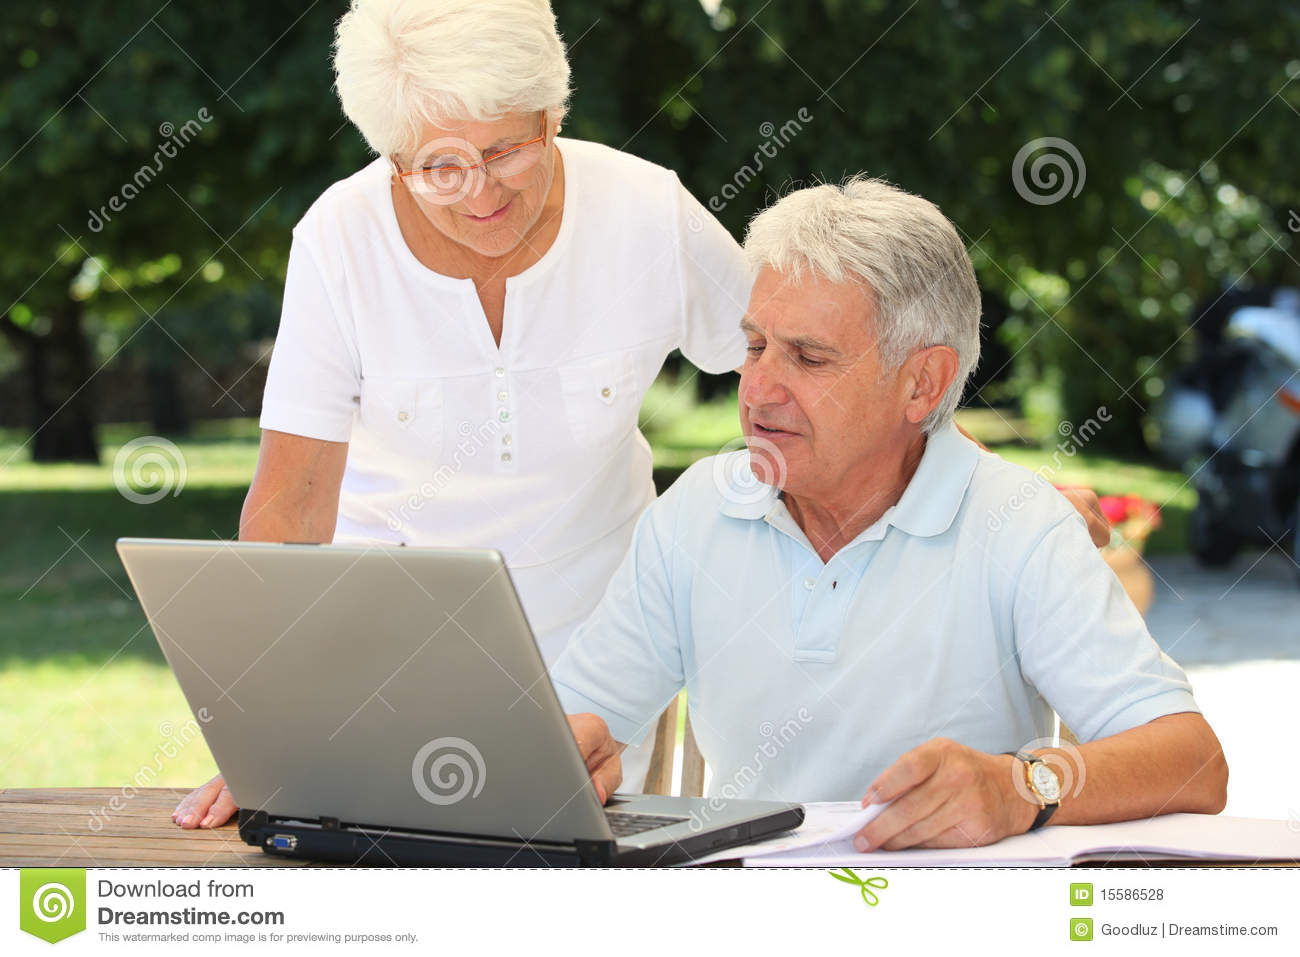 Elderly People and Technology